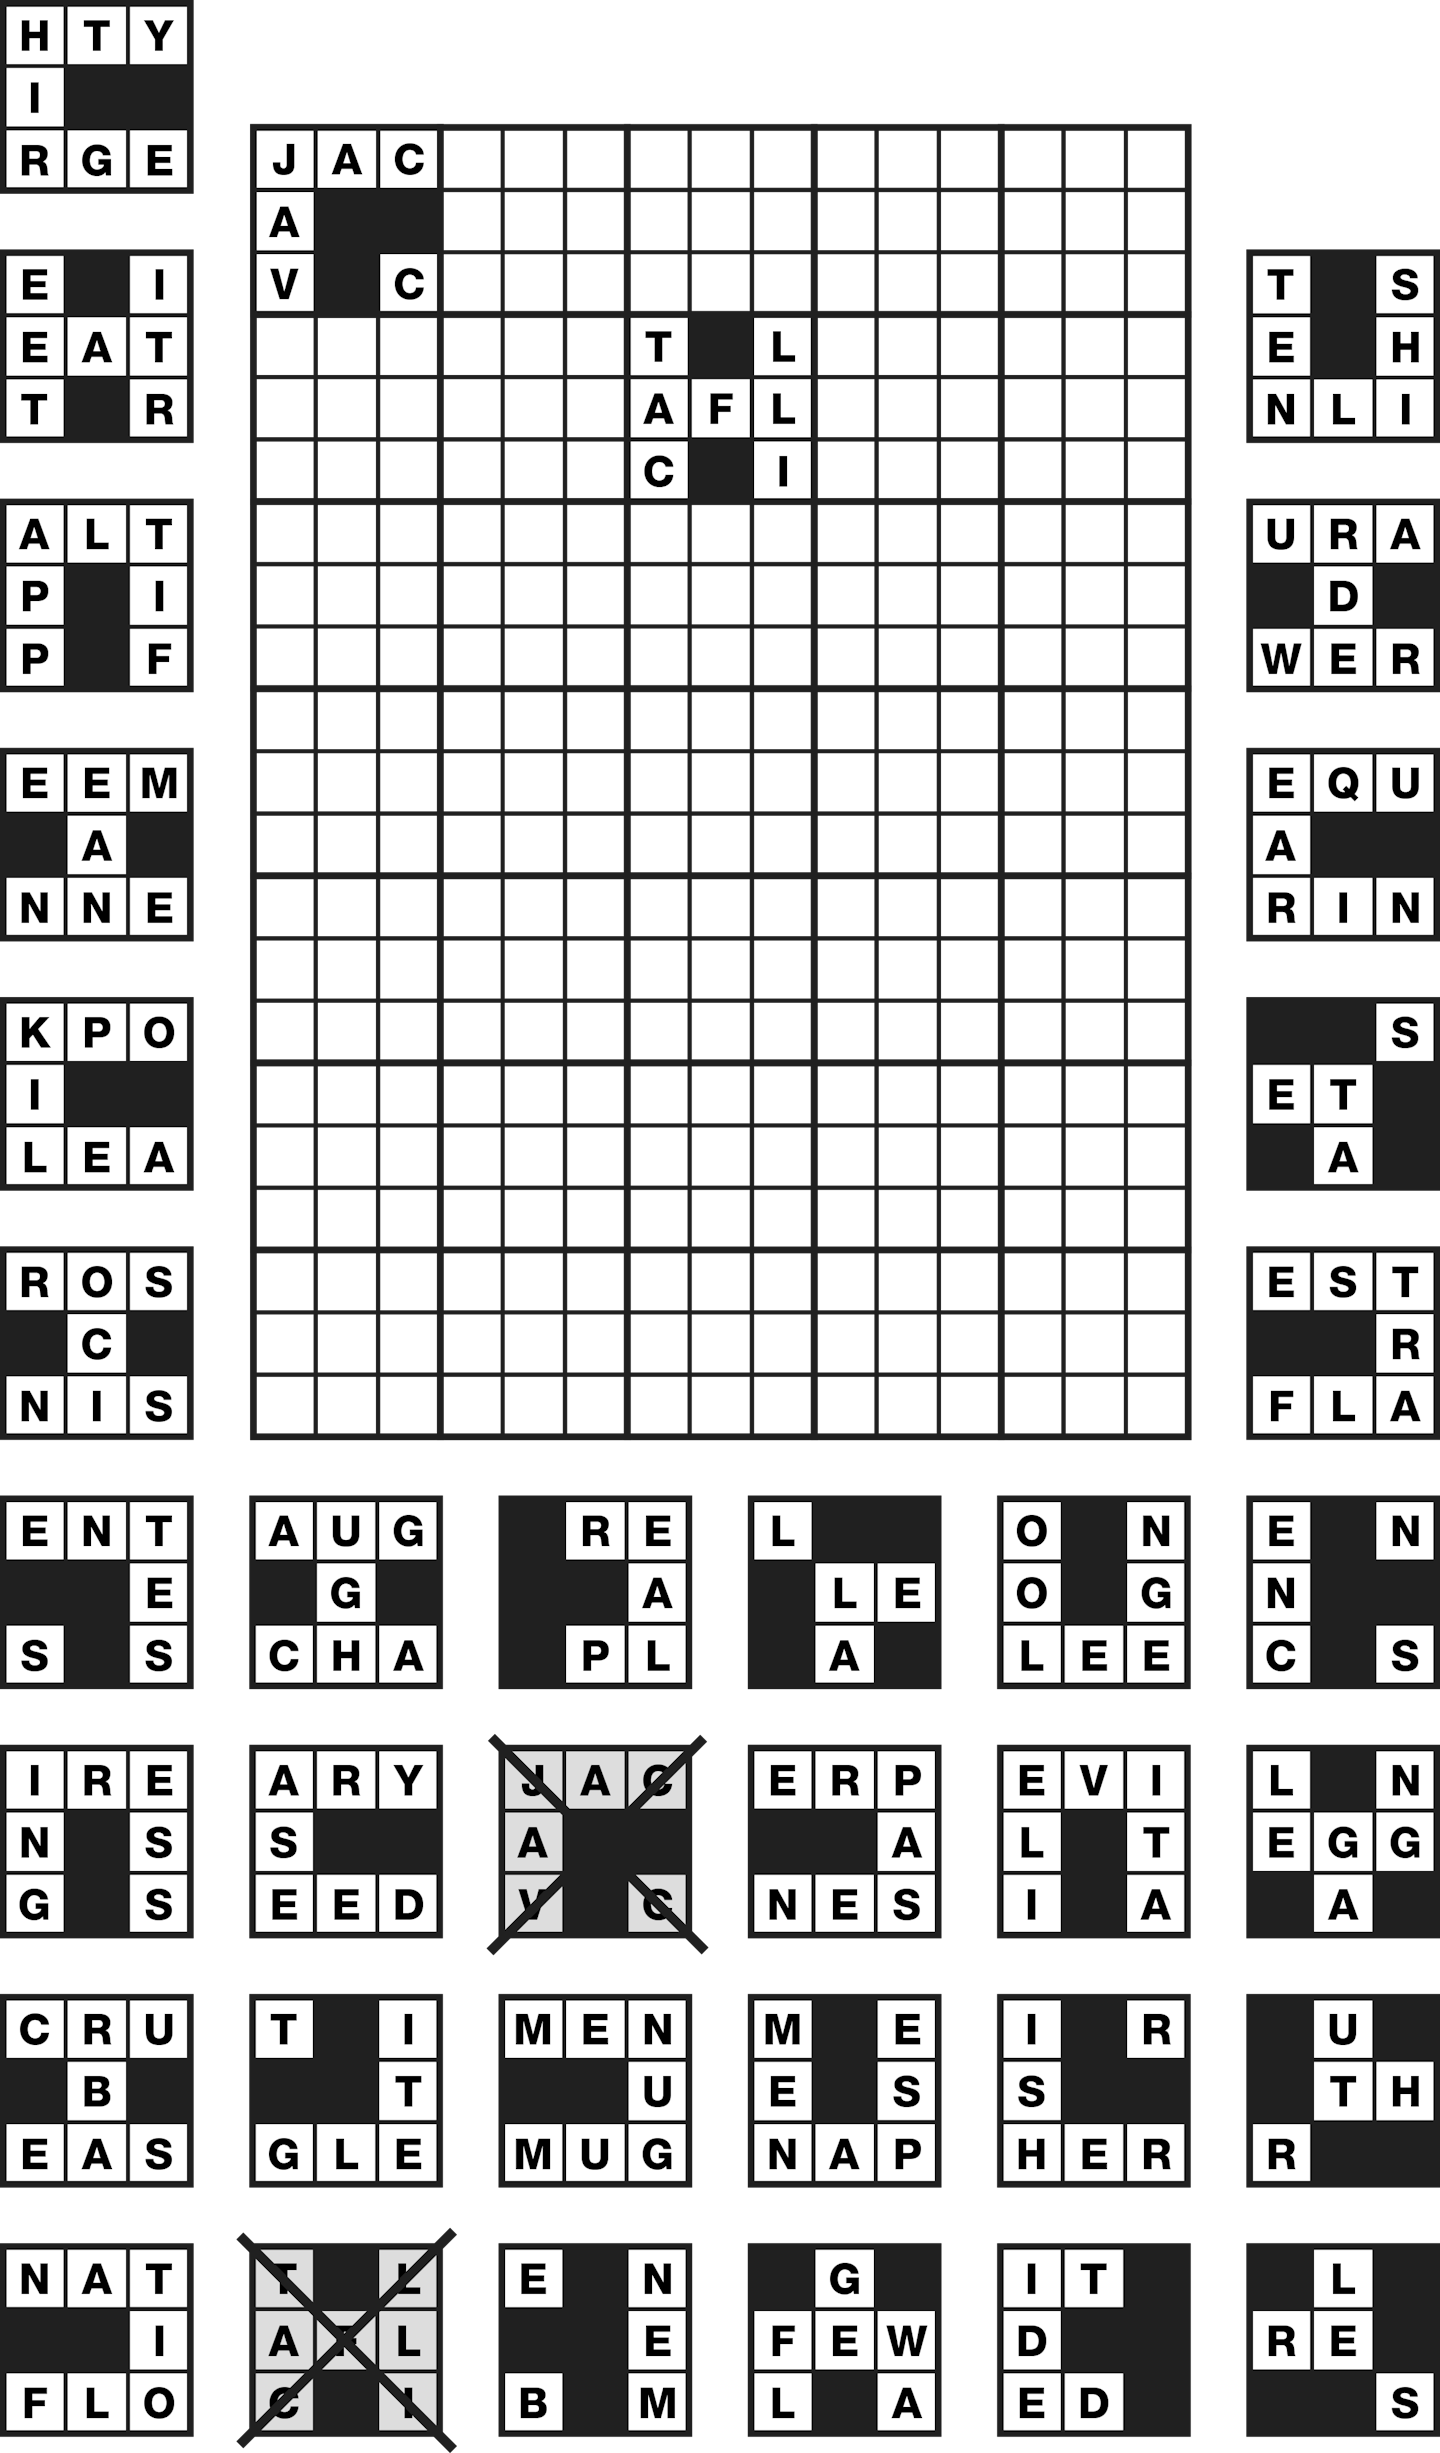 Bits and Pieces example grid